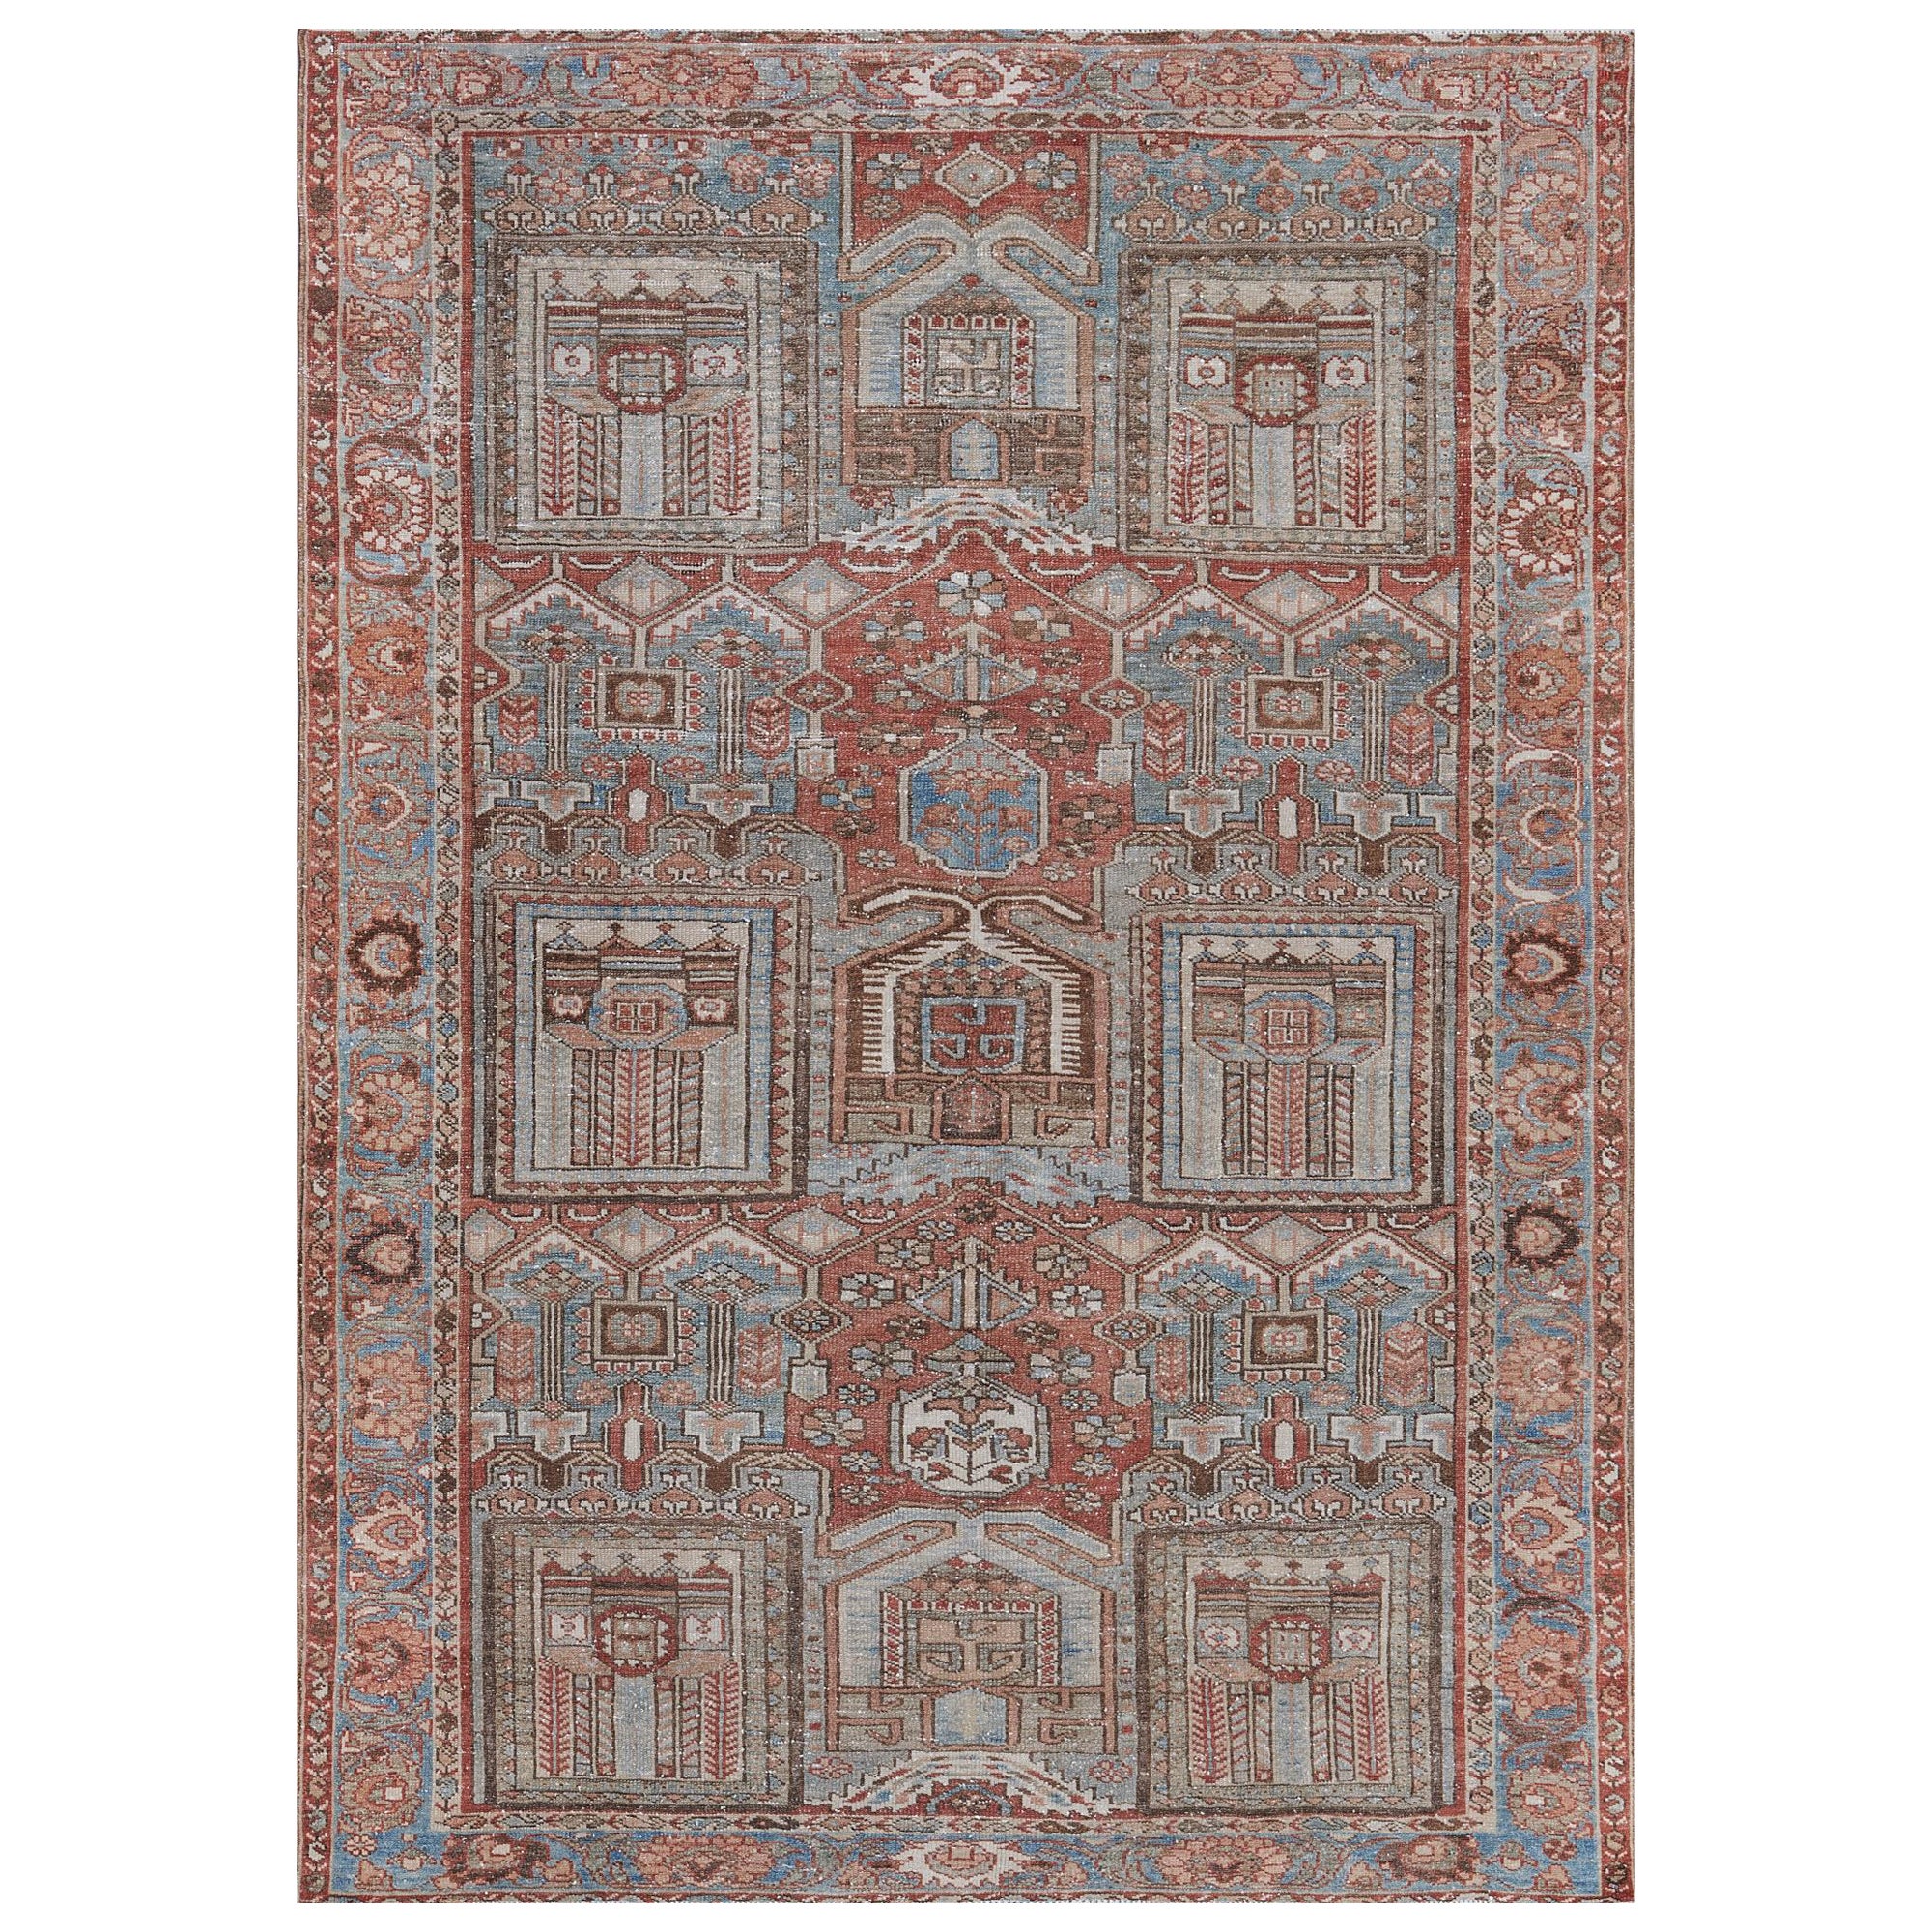 Authentic Hand-woven Antique Circa-1910 Wool Persian Malayer Rug